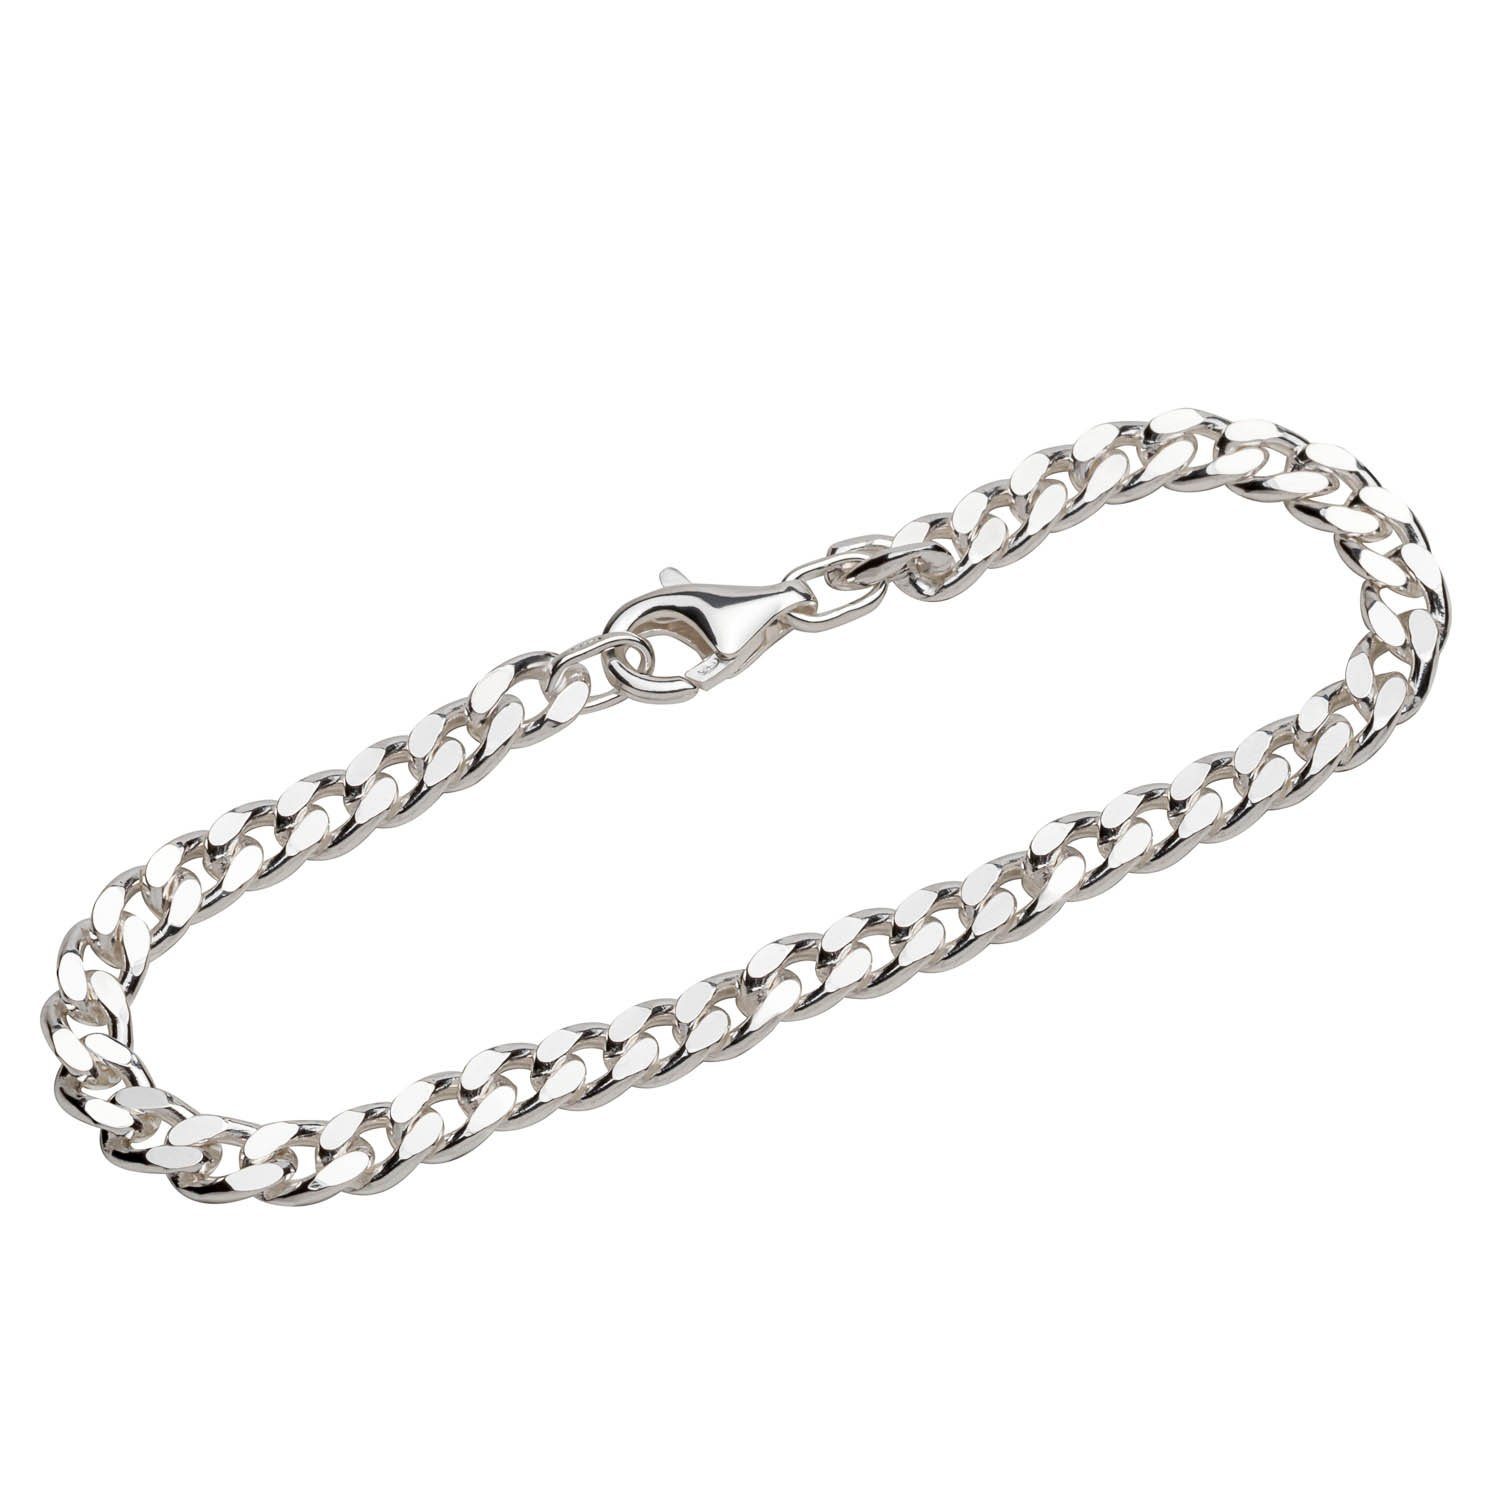 NKlaus Silberarmband Armband 925 Sterling Silber 19cm Panzerkette flach (1 Stück), Made in Germany